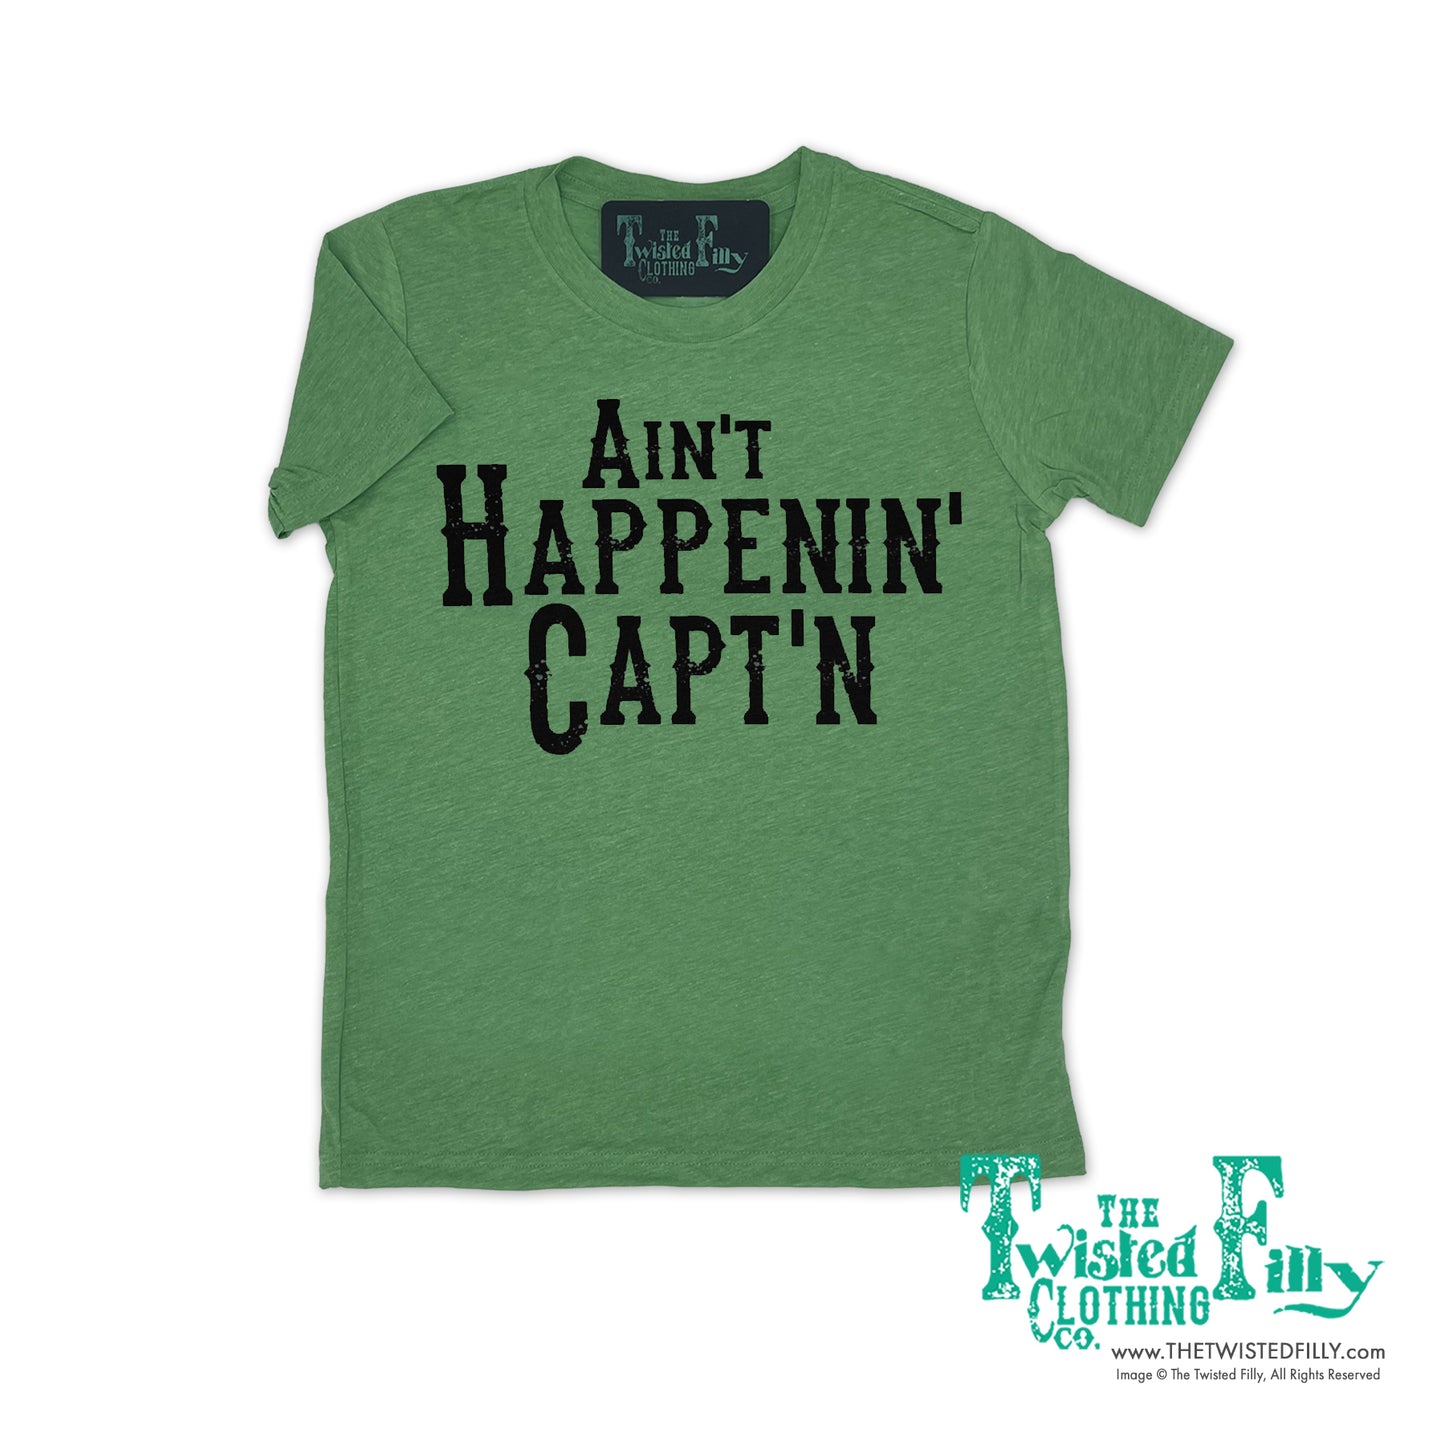 Ain't Happenin' Capt'n - S/S Youth Tee - Assorted Colors